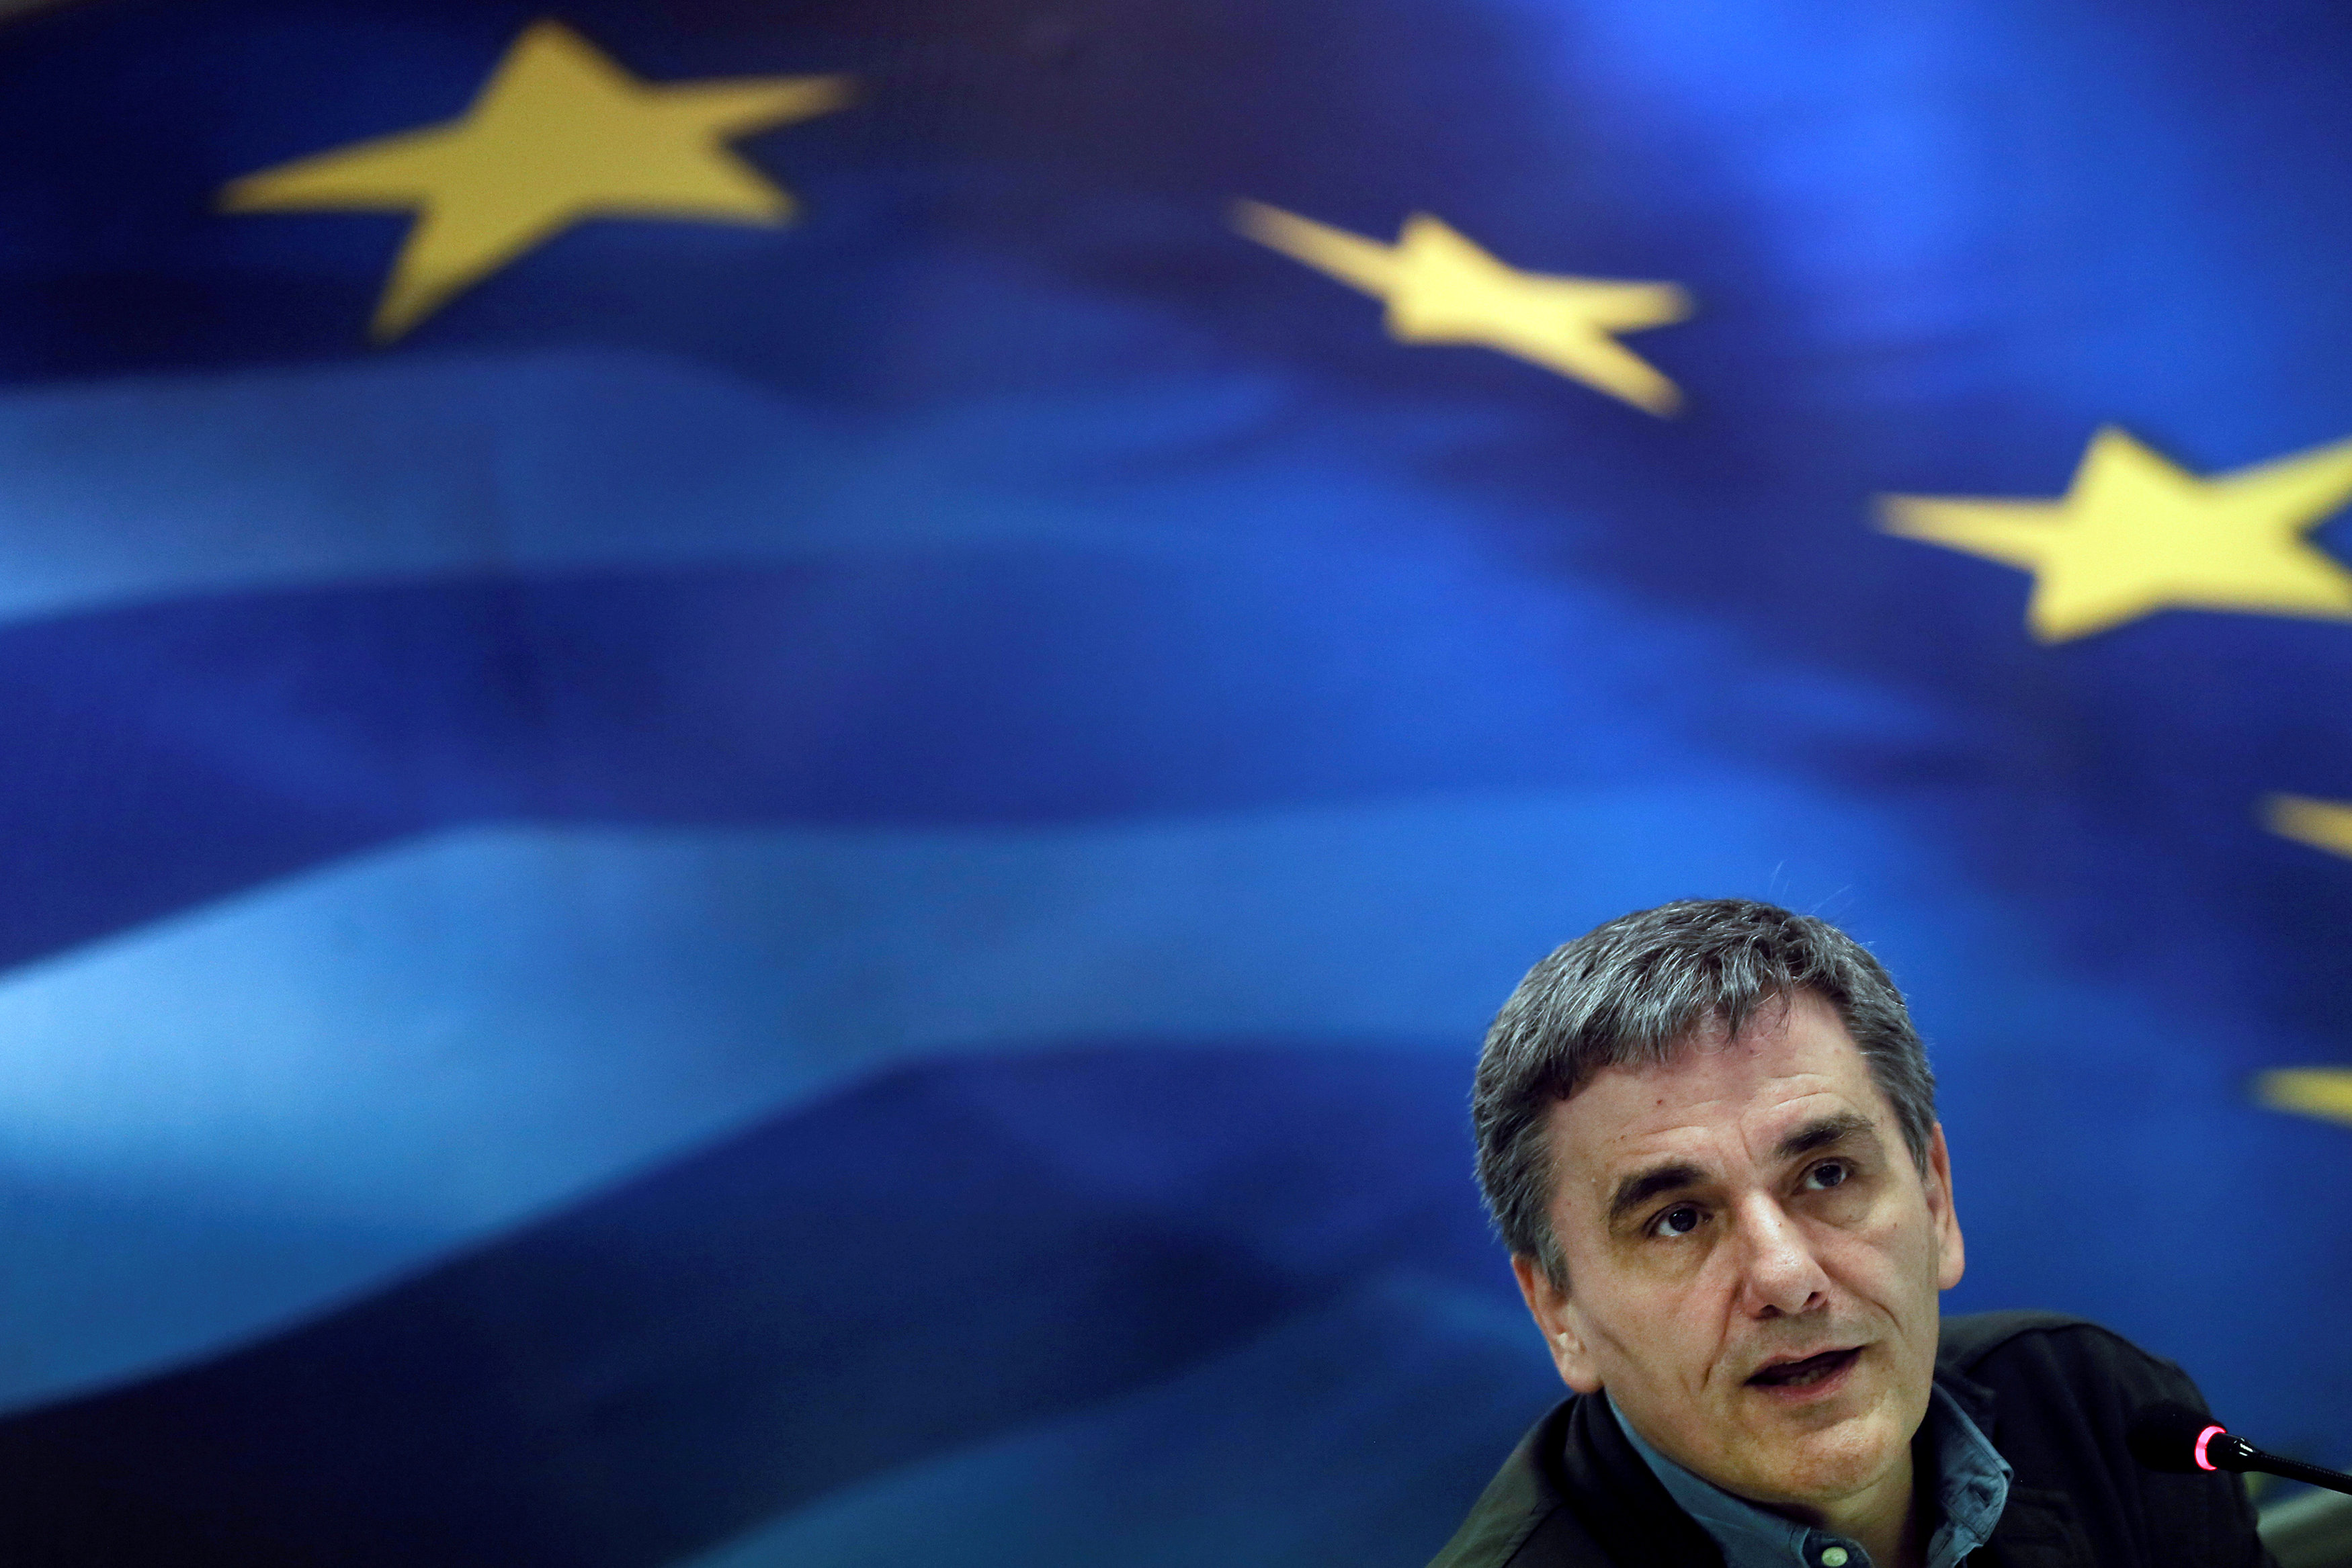 Pledging more austerity, Greece cuts deal with lenders